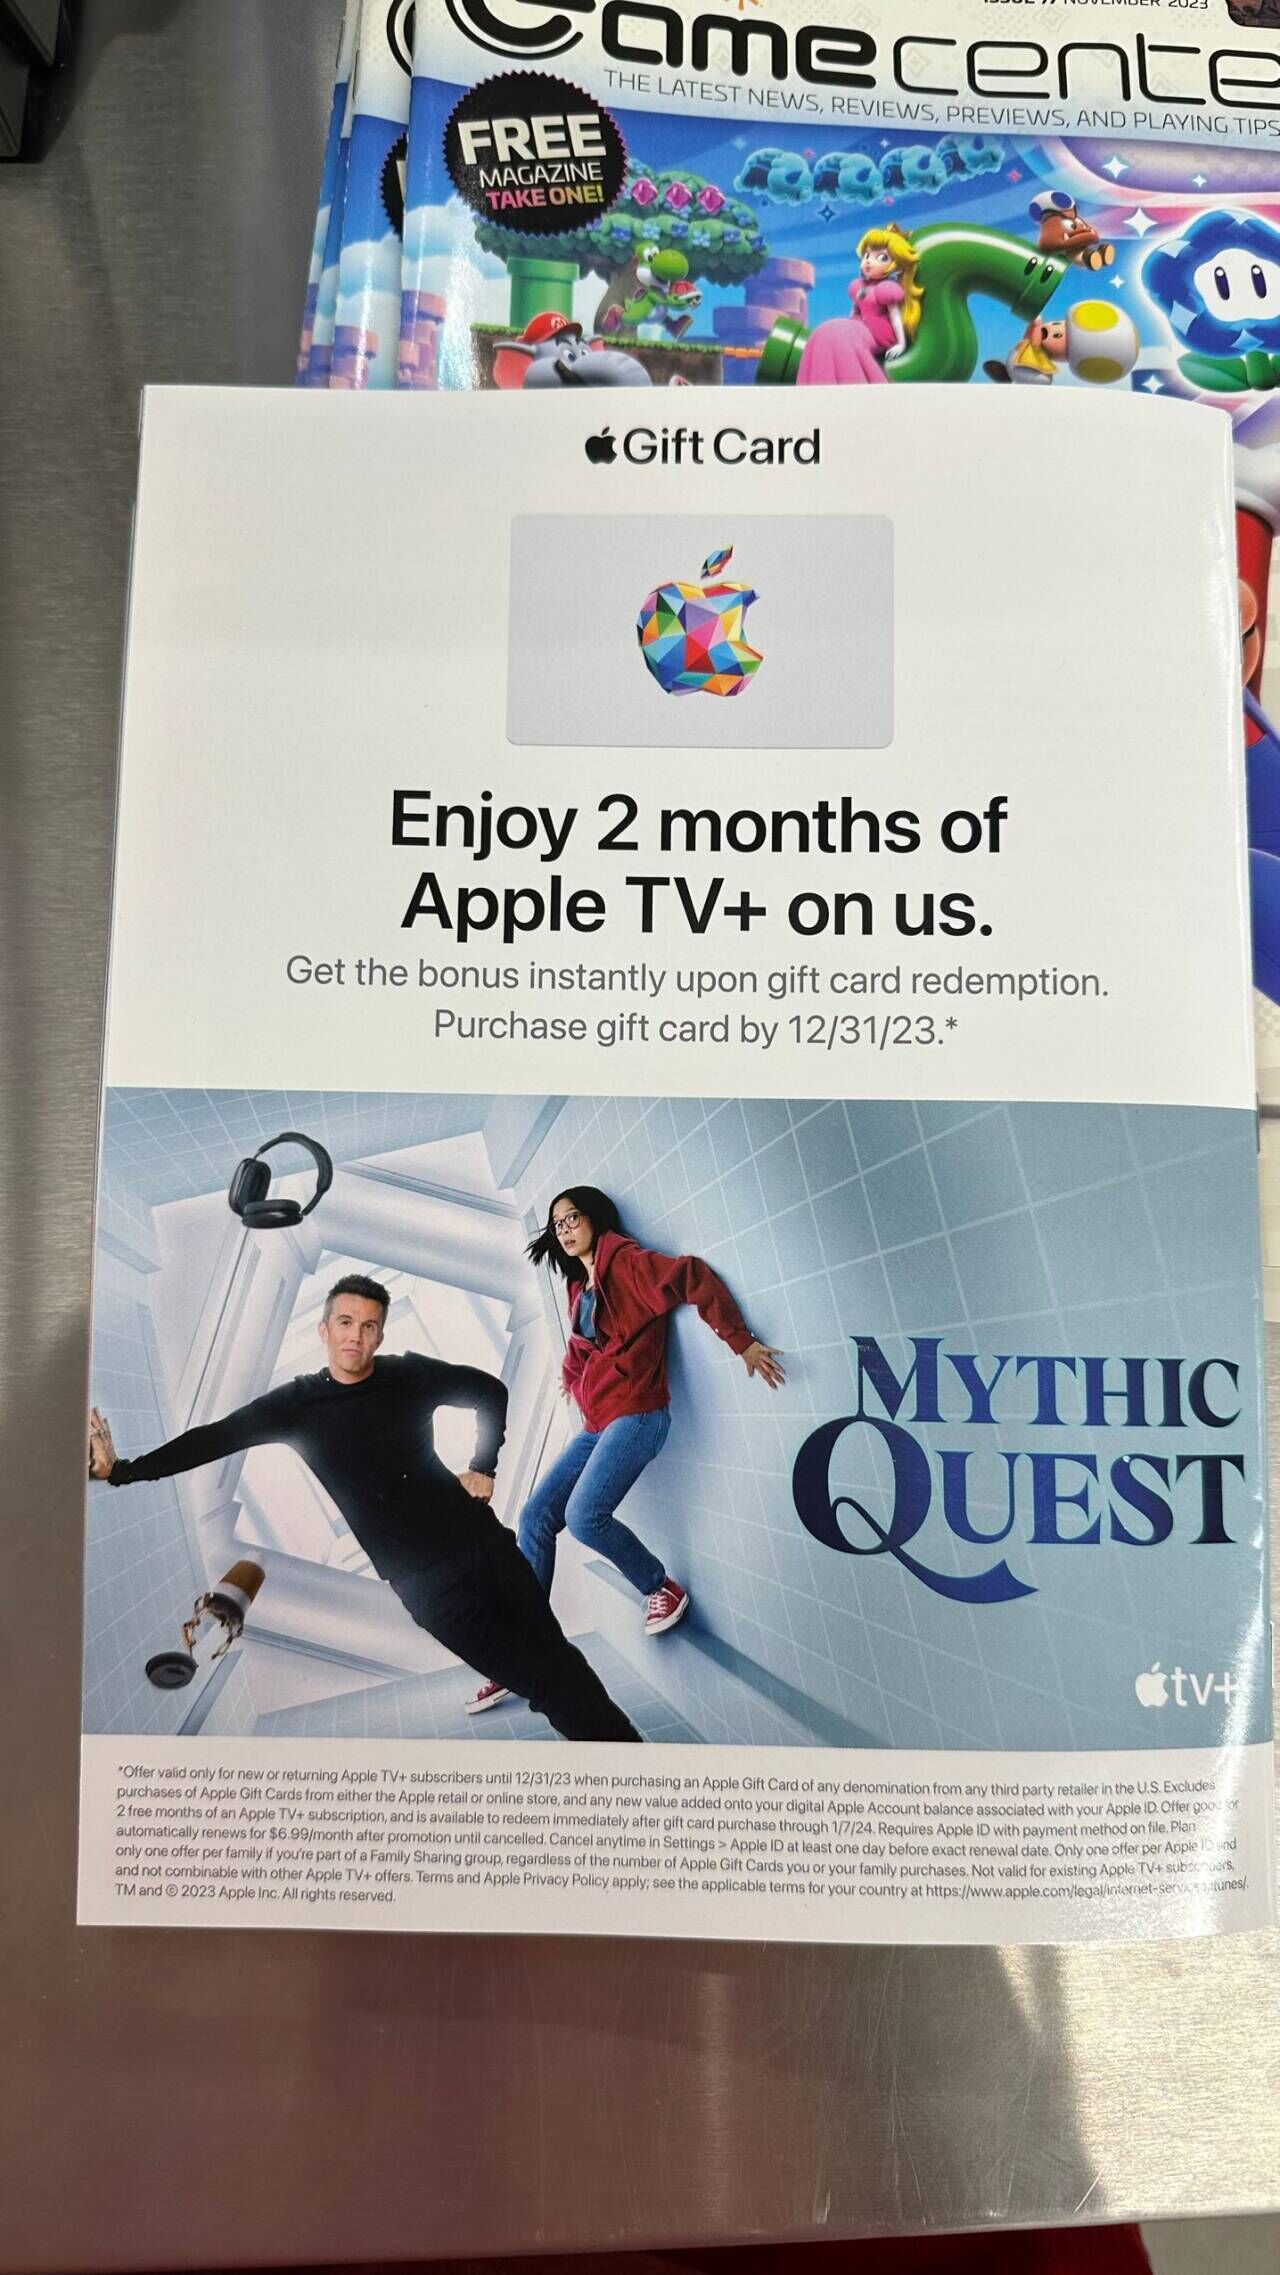 two months of Apple TV plus with apple gift card redemption  - $0